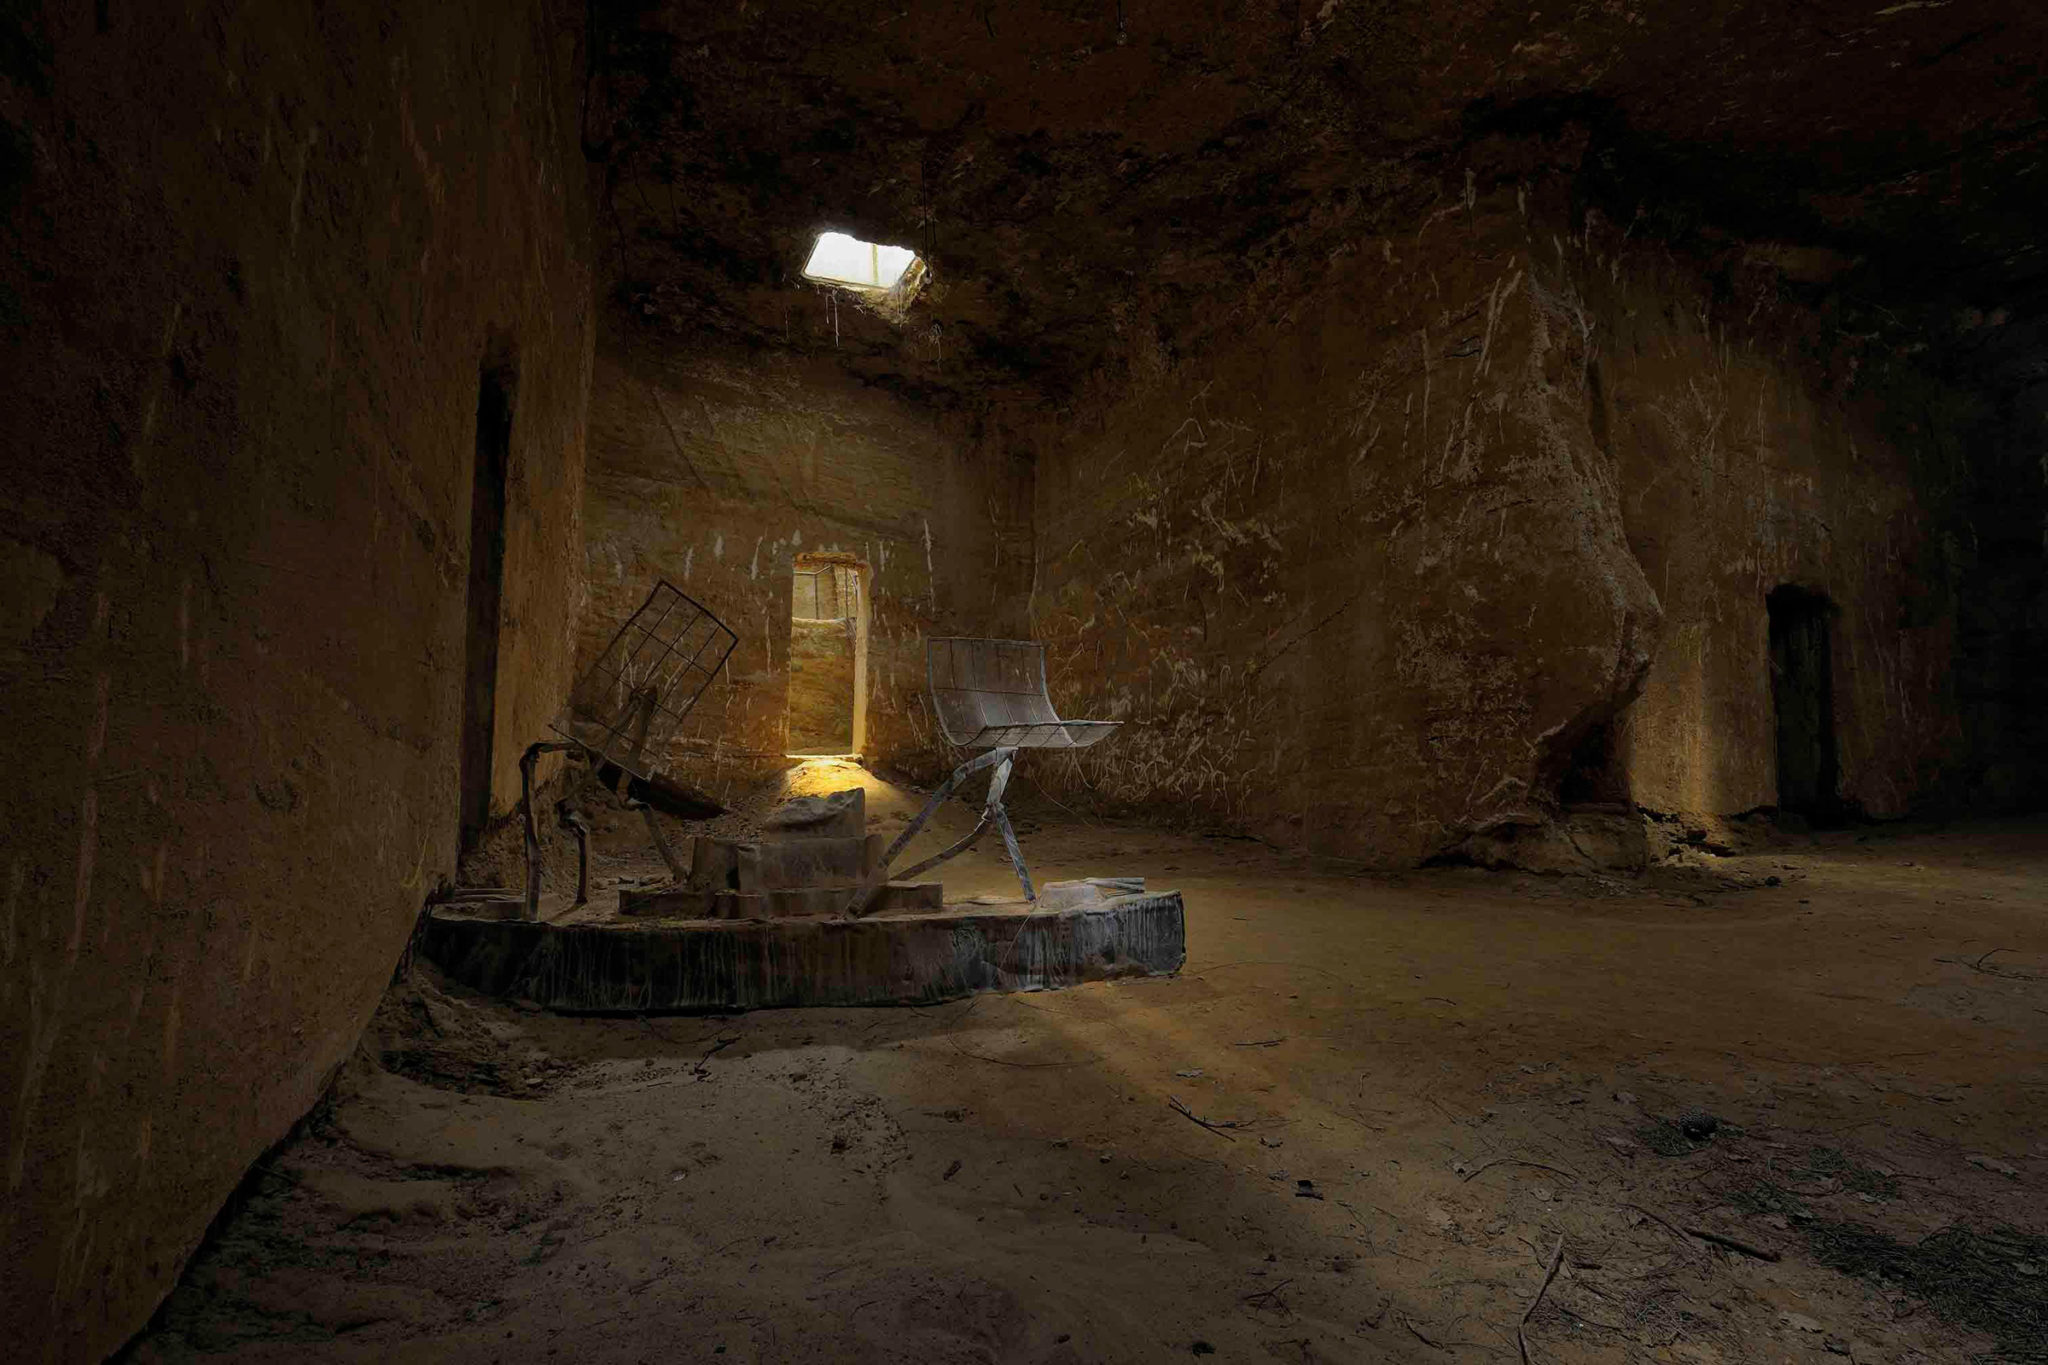 Large undergorund room with a sculpture by Anslem Kiefer